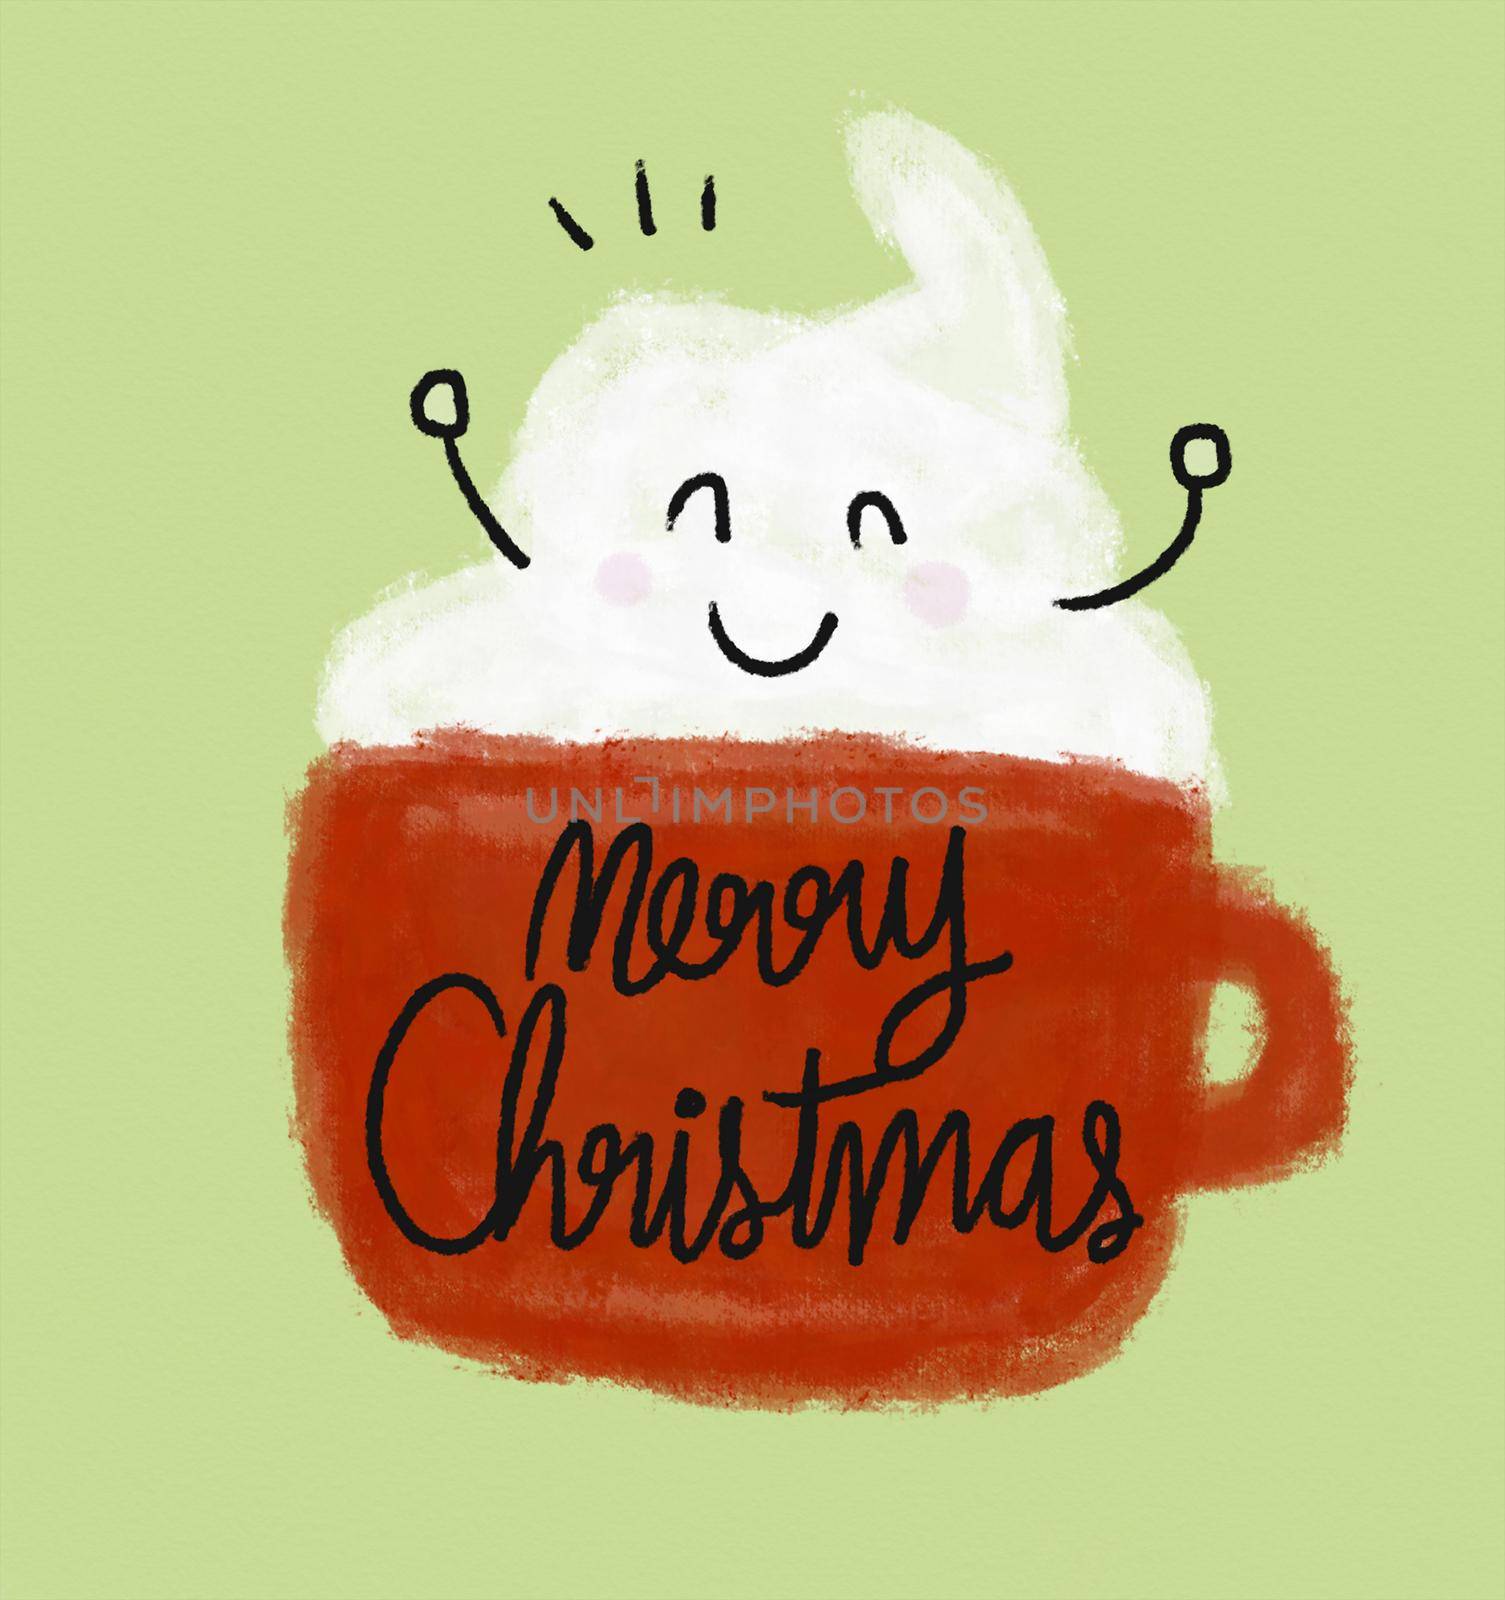 Merry Christmas coffee cup and smile face watercolor painting illustration